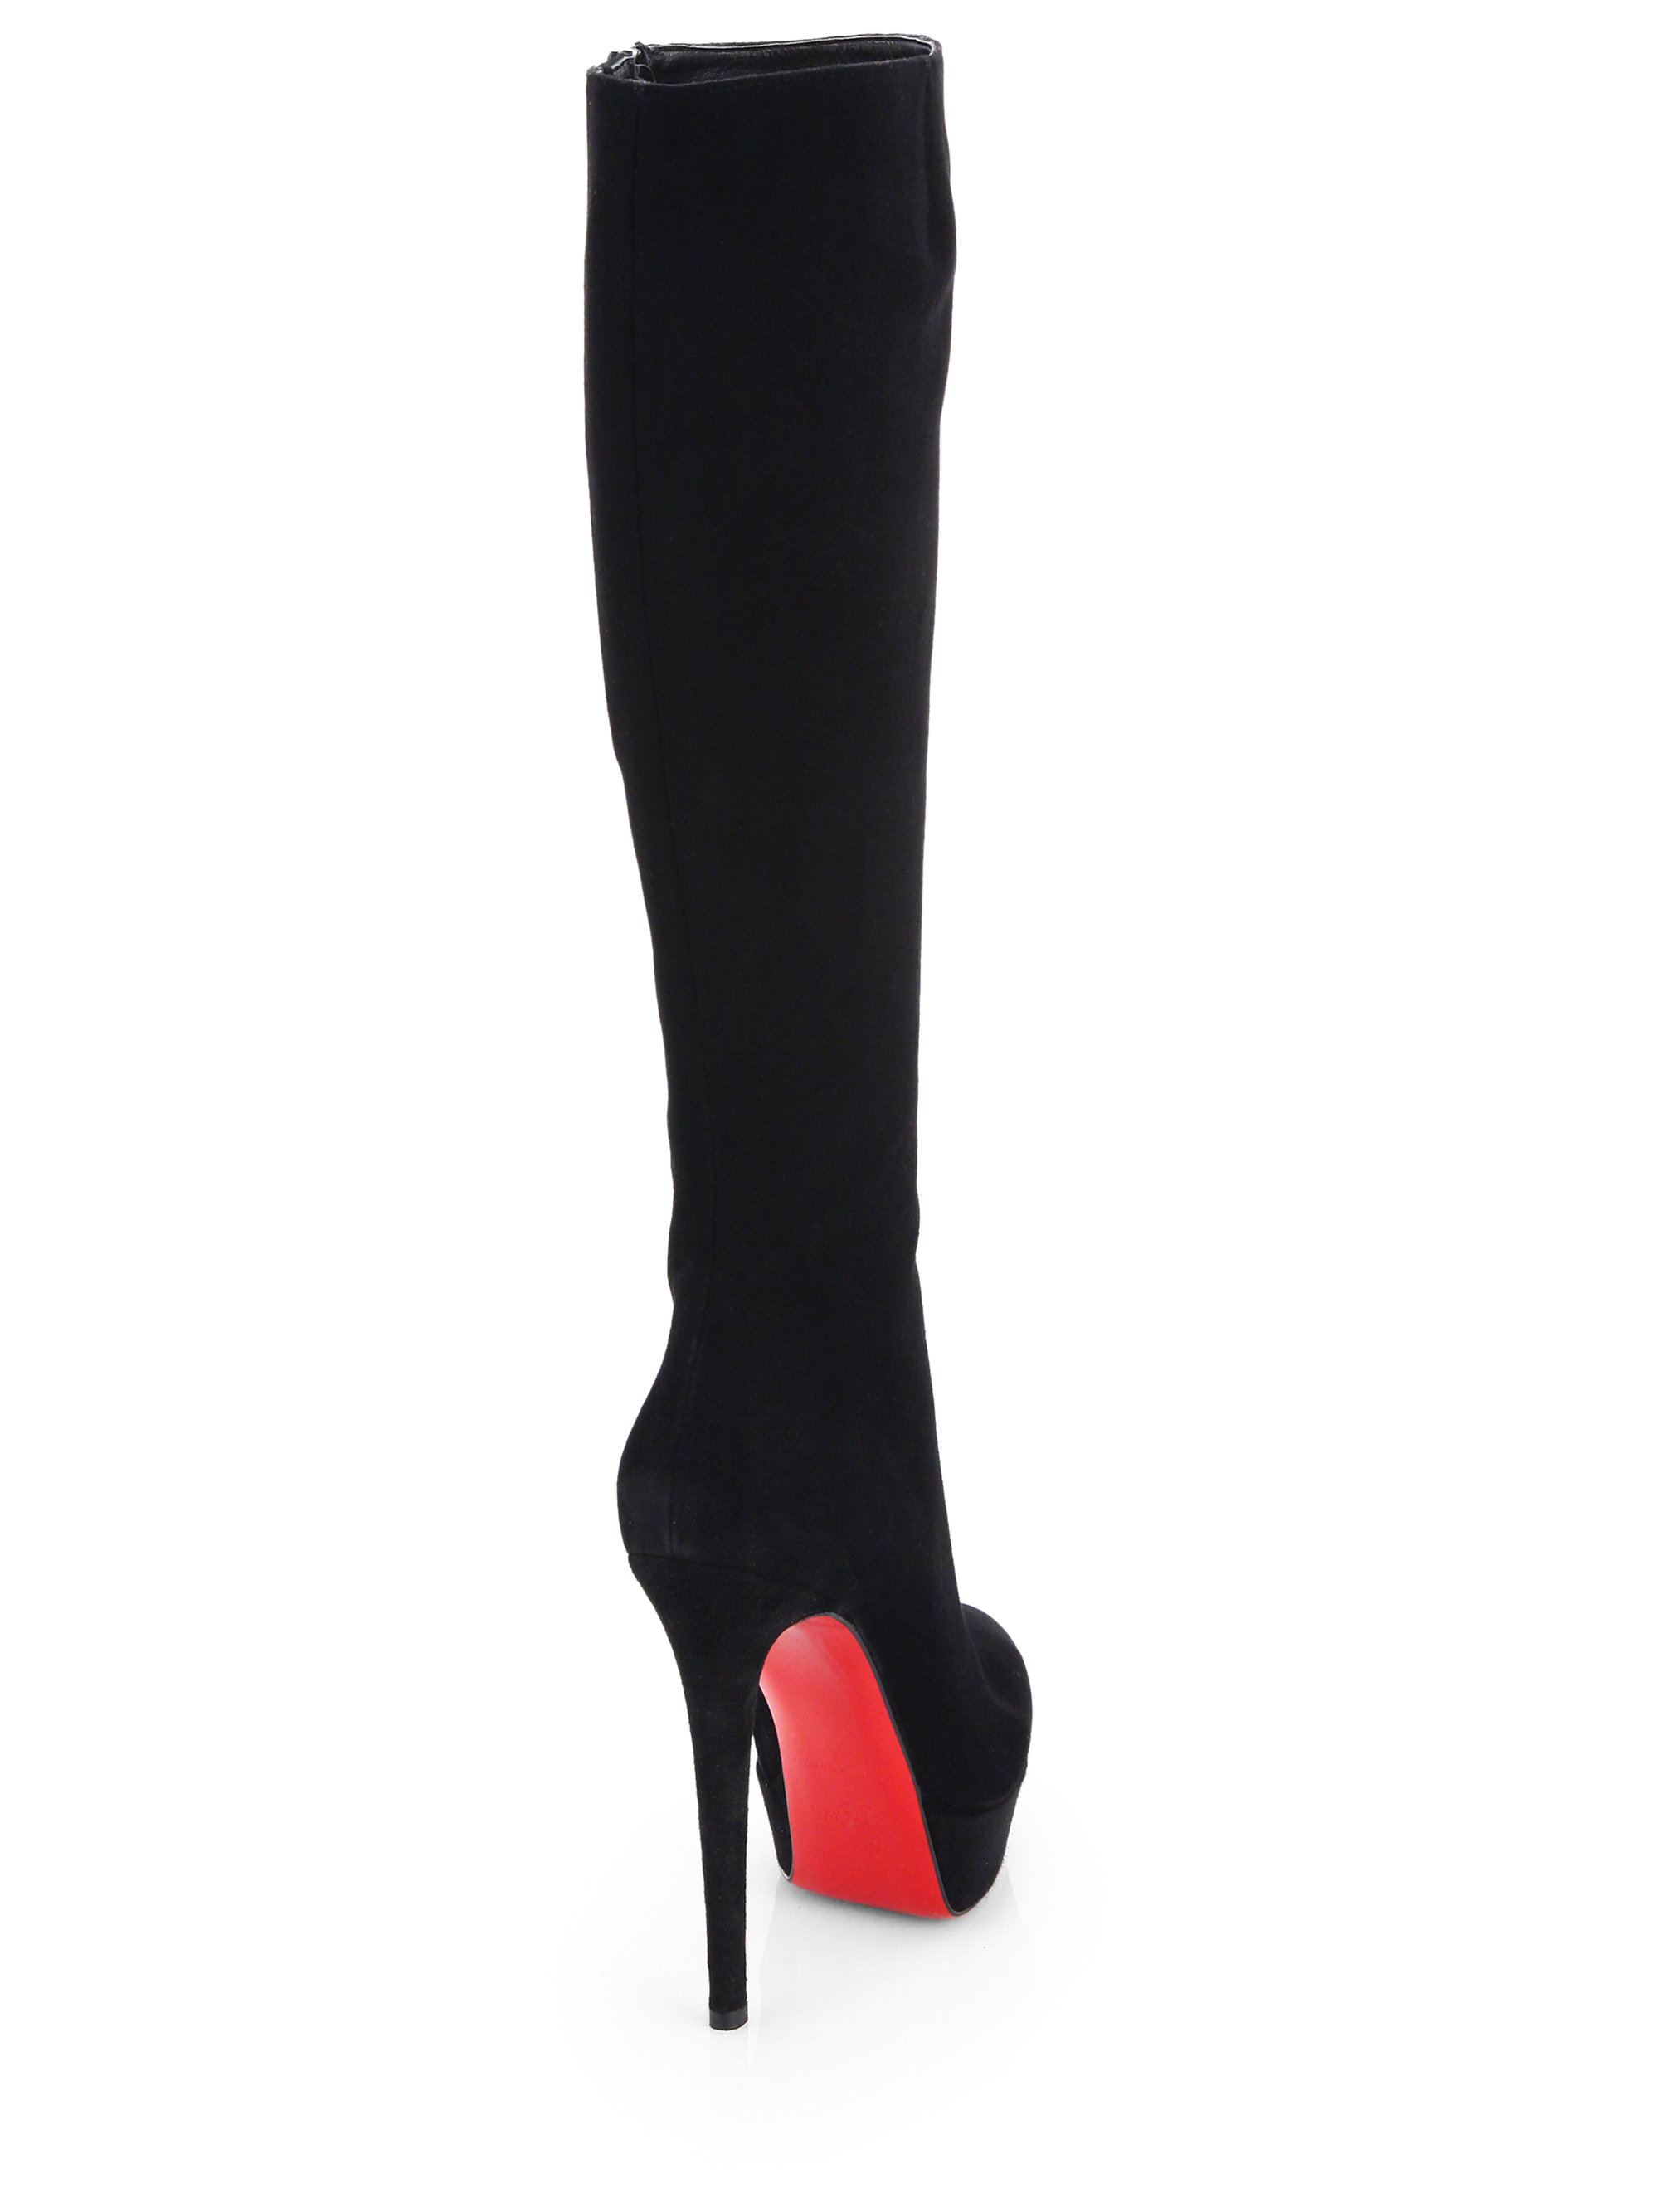 christian louboutin men shoes - Christian louboutin Bianca Suede Knee-High Boots in Black | Lyst